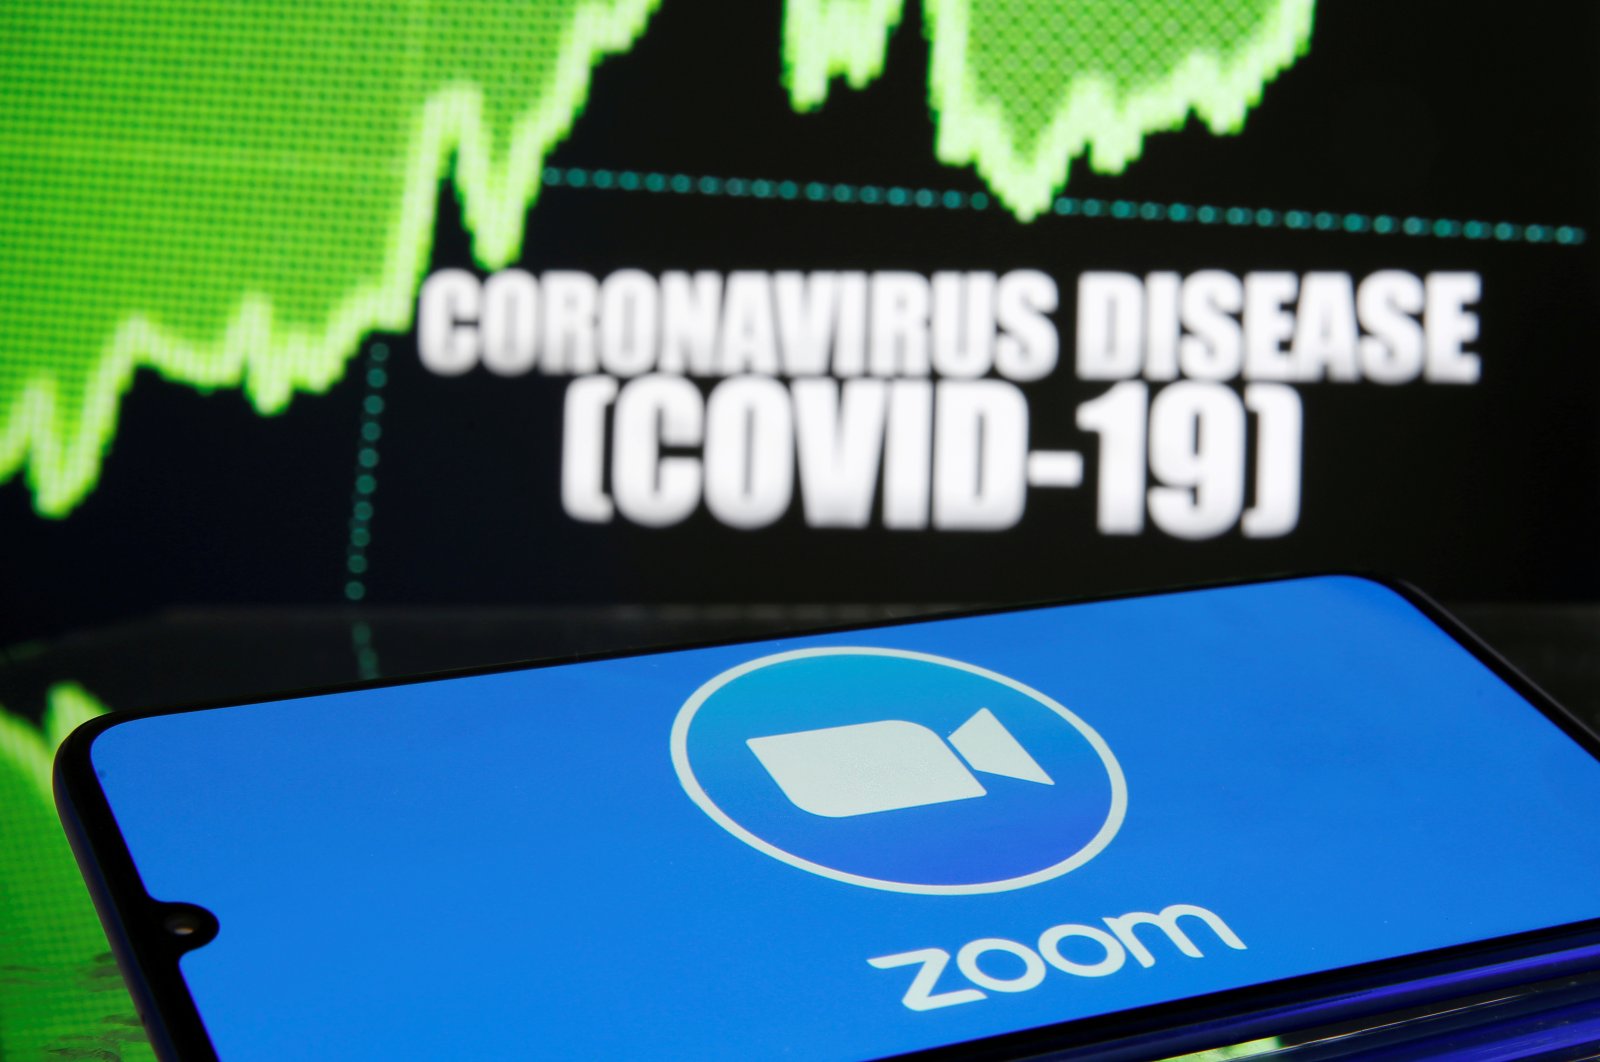 The Zoom logo is seen in front of a COVID-19-related image in this photo taken March 19, 2020. (Reuters Photo)